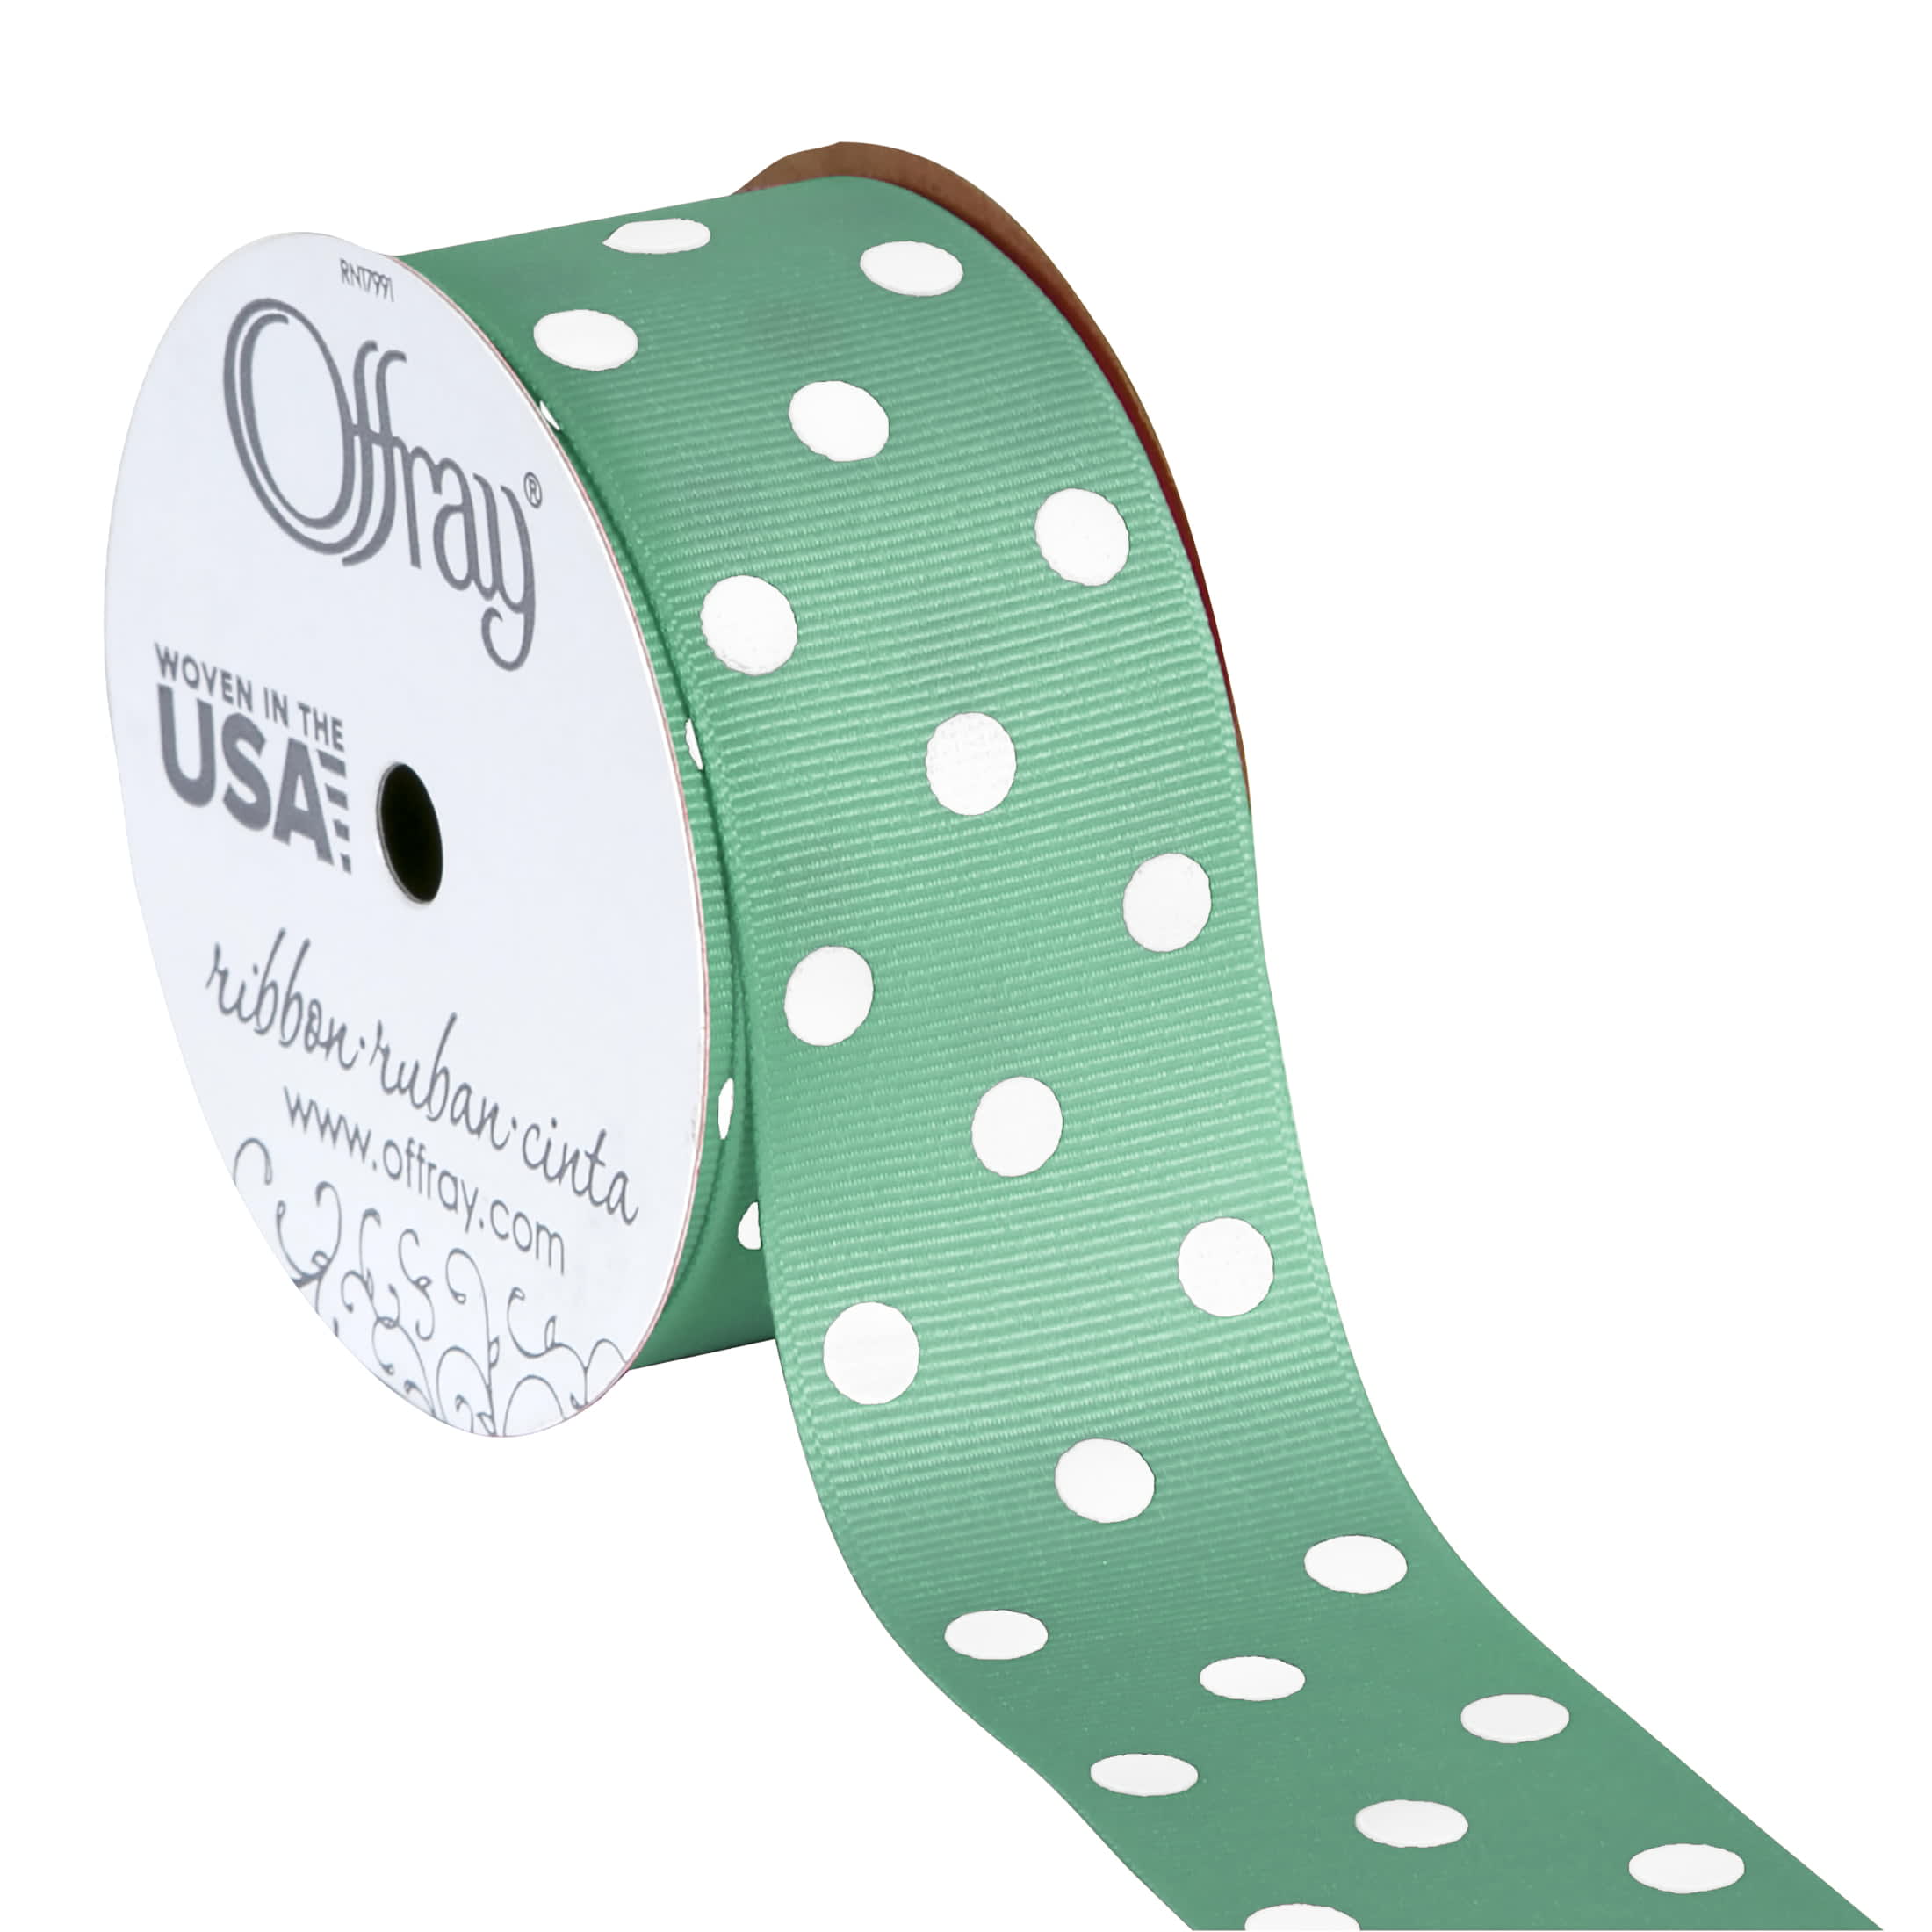 Offray Ribbon, Diamond Blue with White Polka Dot 1 1/2 inch Grosgrain  Polyester Ribbon, 9 feet - DroneUp Delivery